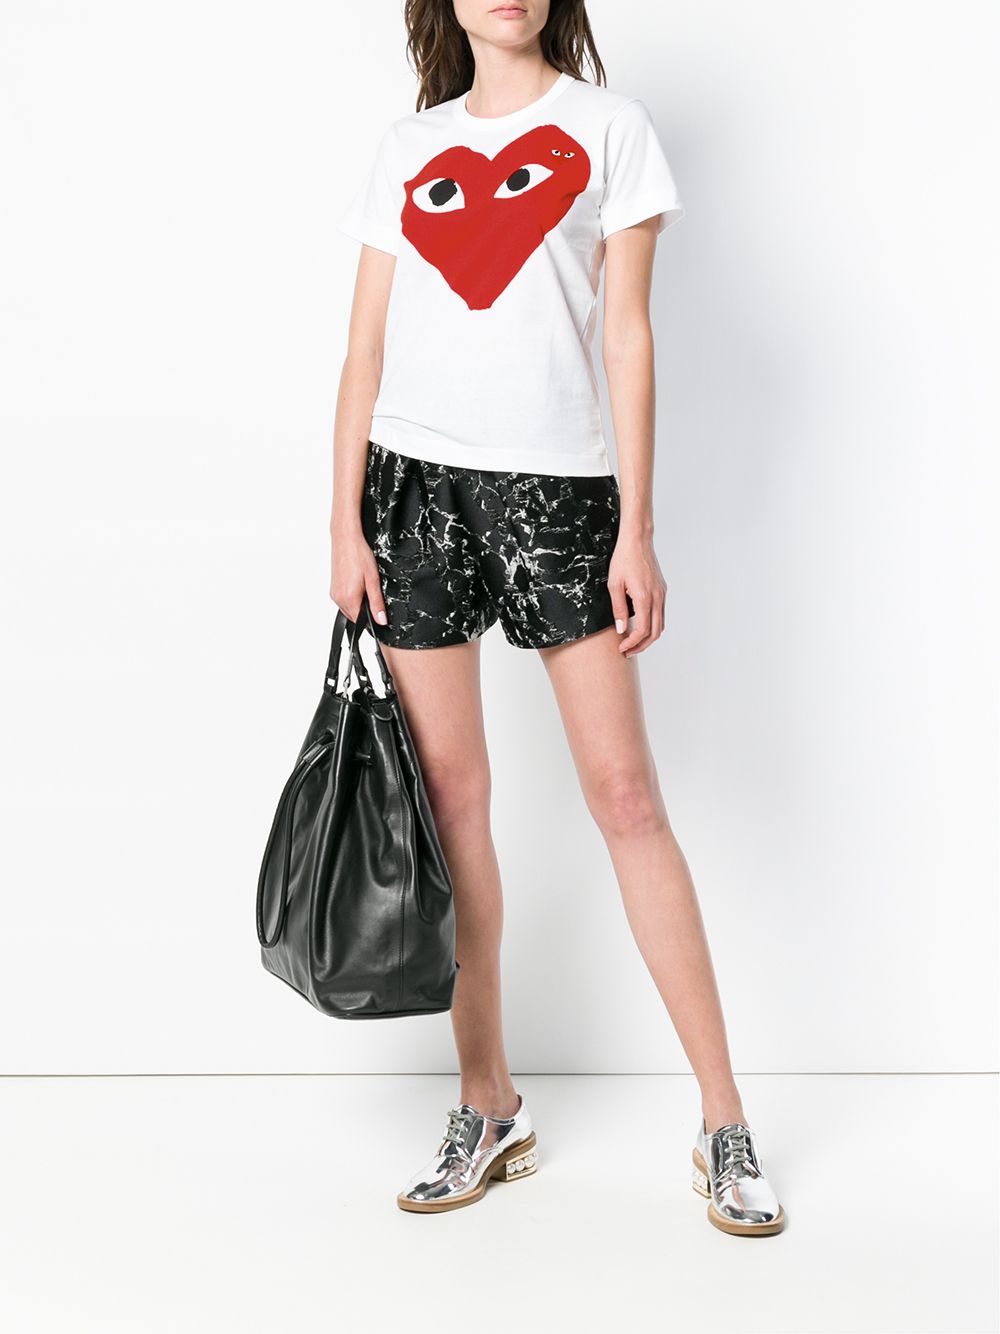 Short sleeves T-shirt with heart